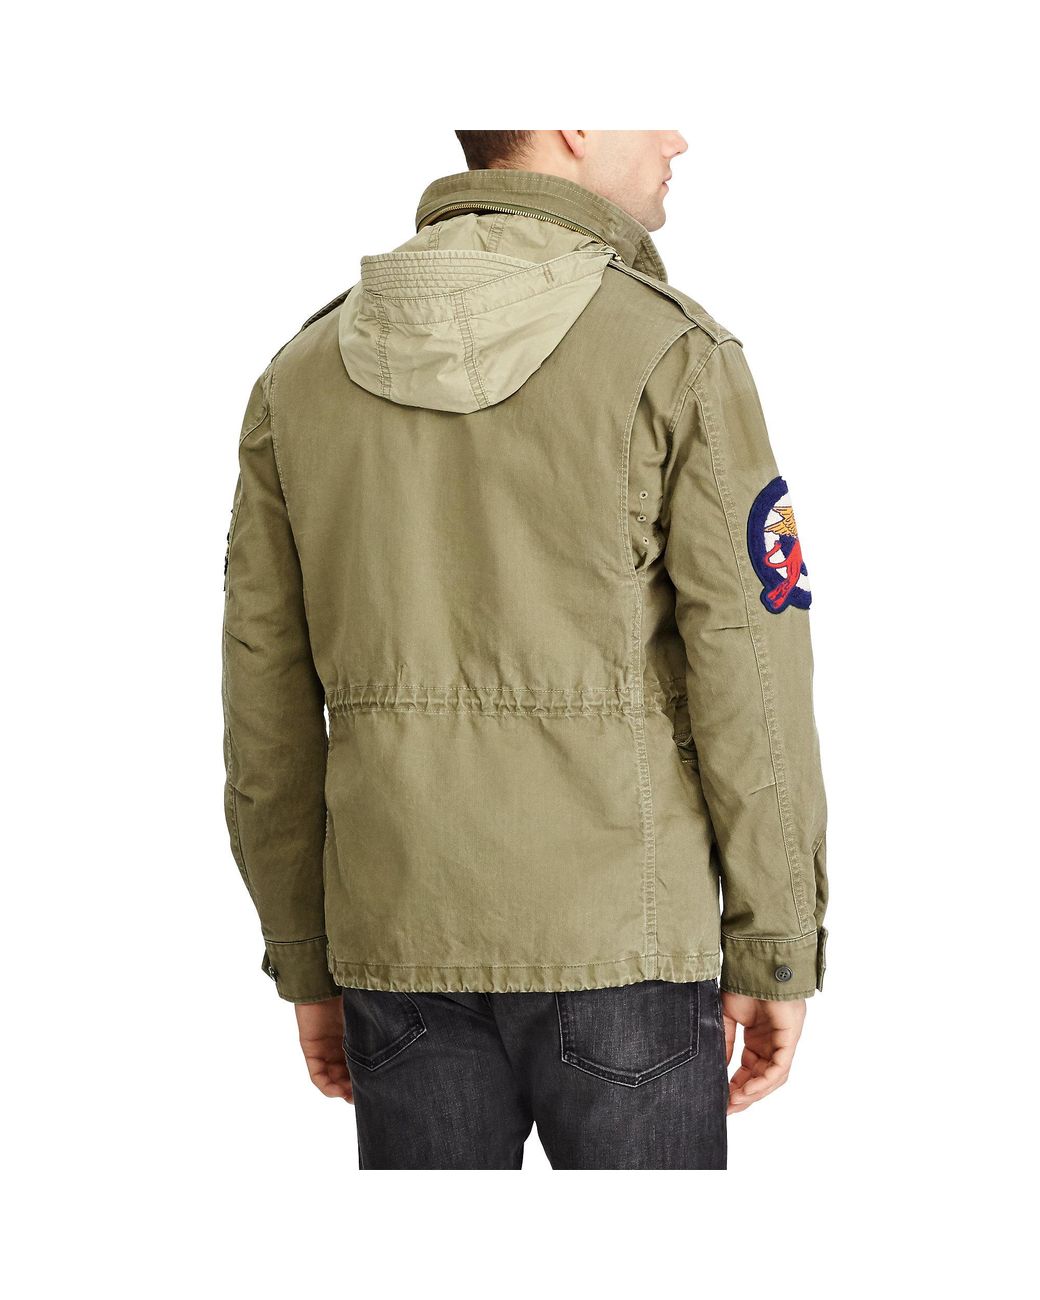 Polo Ralph Lauren The Iconic M-65 Field Jacket in Green for Men 